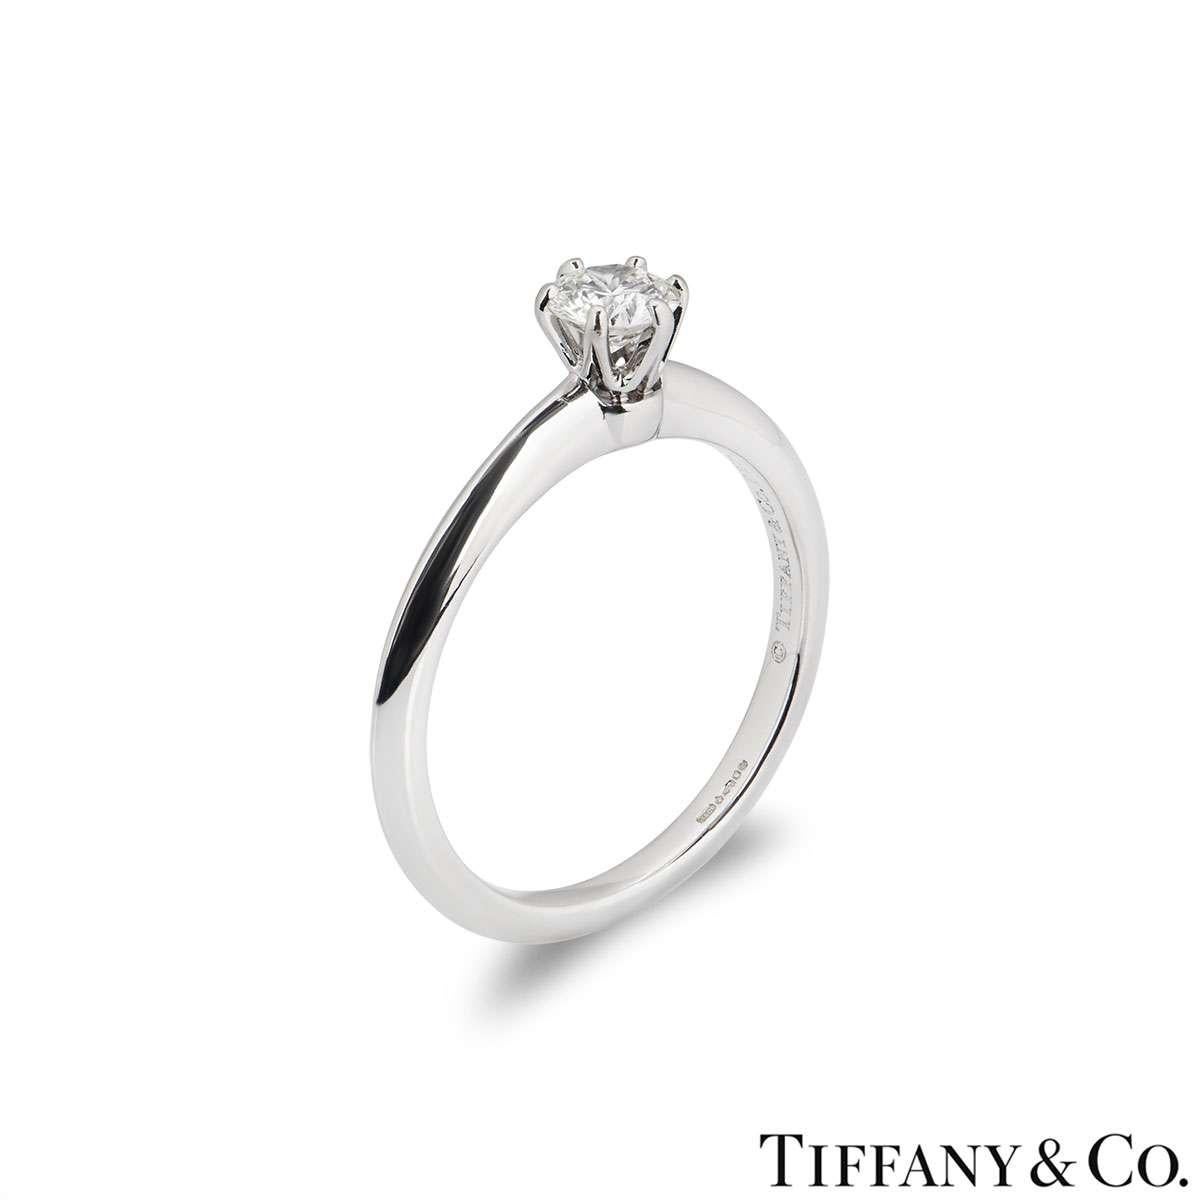 A beautiful platinum diamond ring by Tiffany & Co. from The Setting collection. The ring comprises of a round brilliant cut diamond in a 6 claw setting with a weight of 0.32ct, H colour and VVS1 clarity. The diamond scores an excellent rating in all